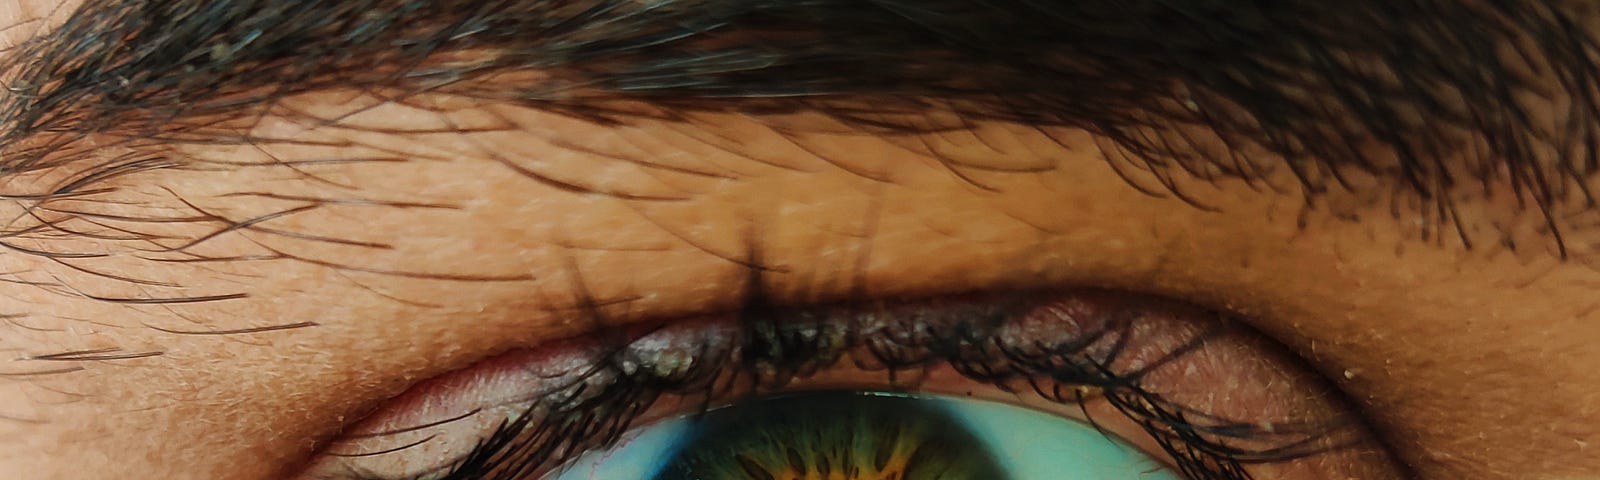 A close-up photo of a man’s eye, staring intently